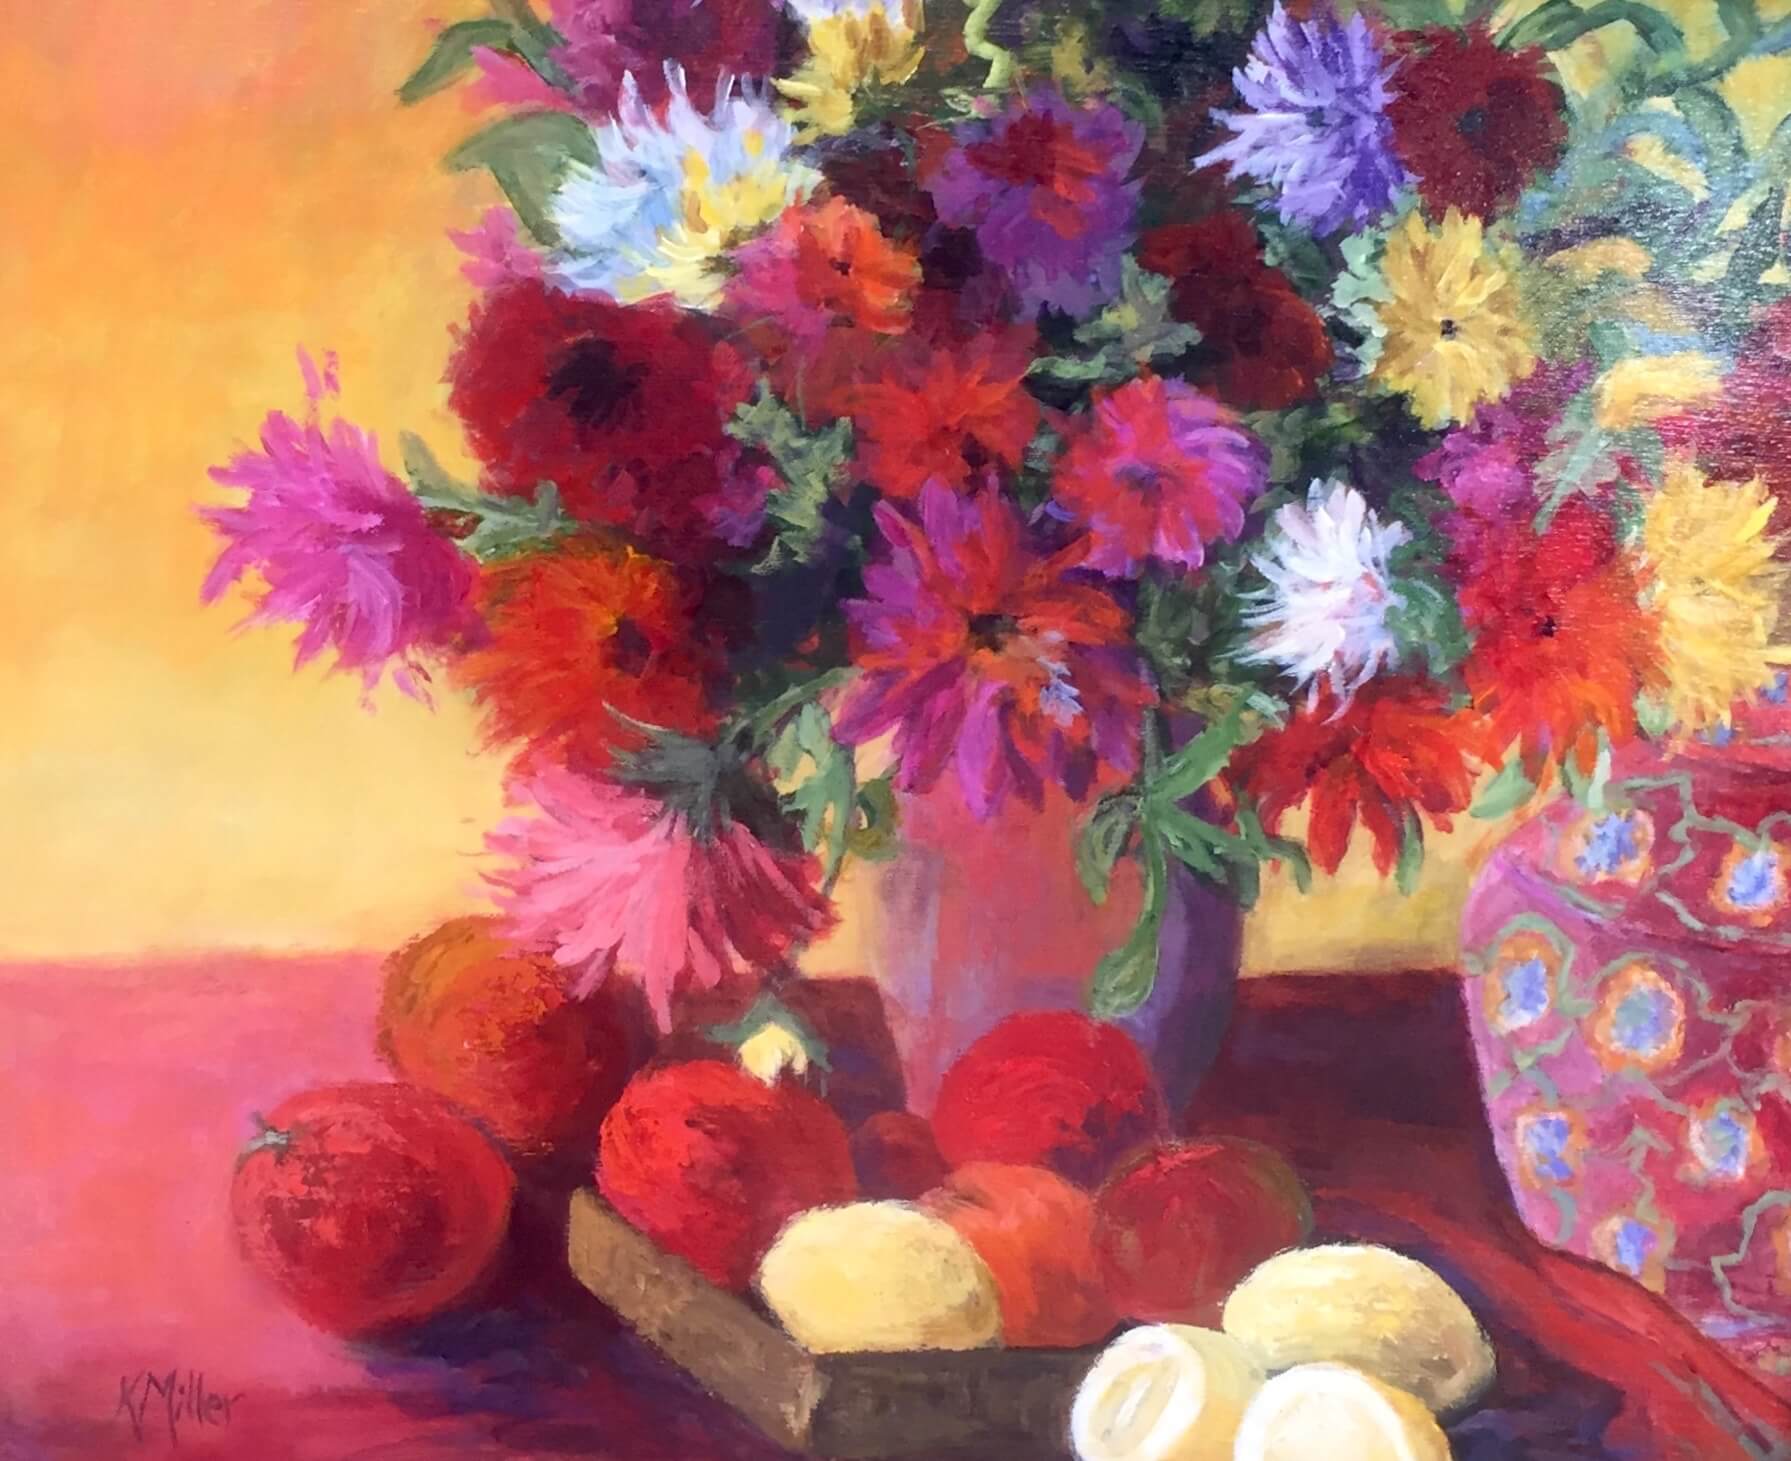 Dahlias Still Life With Vase, Lemons and Apples original acrylic painting by Kathy Miller